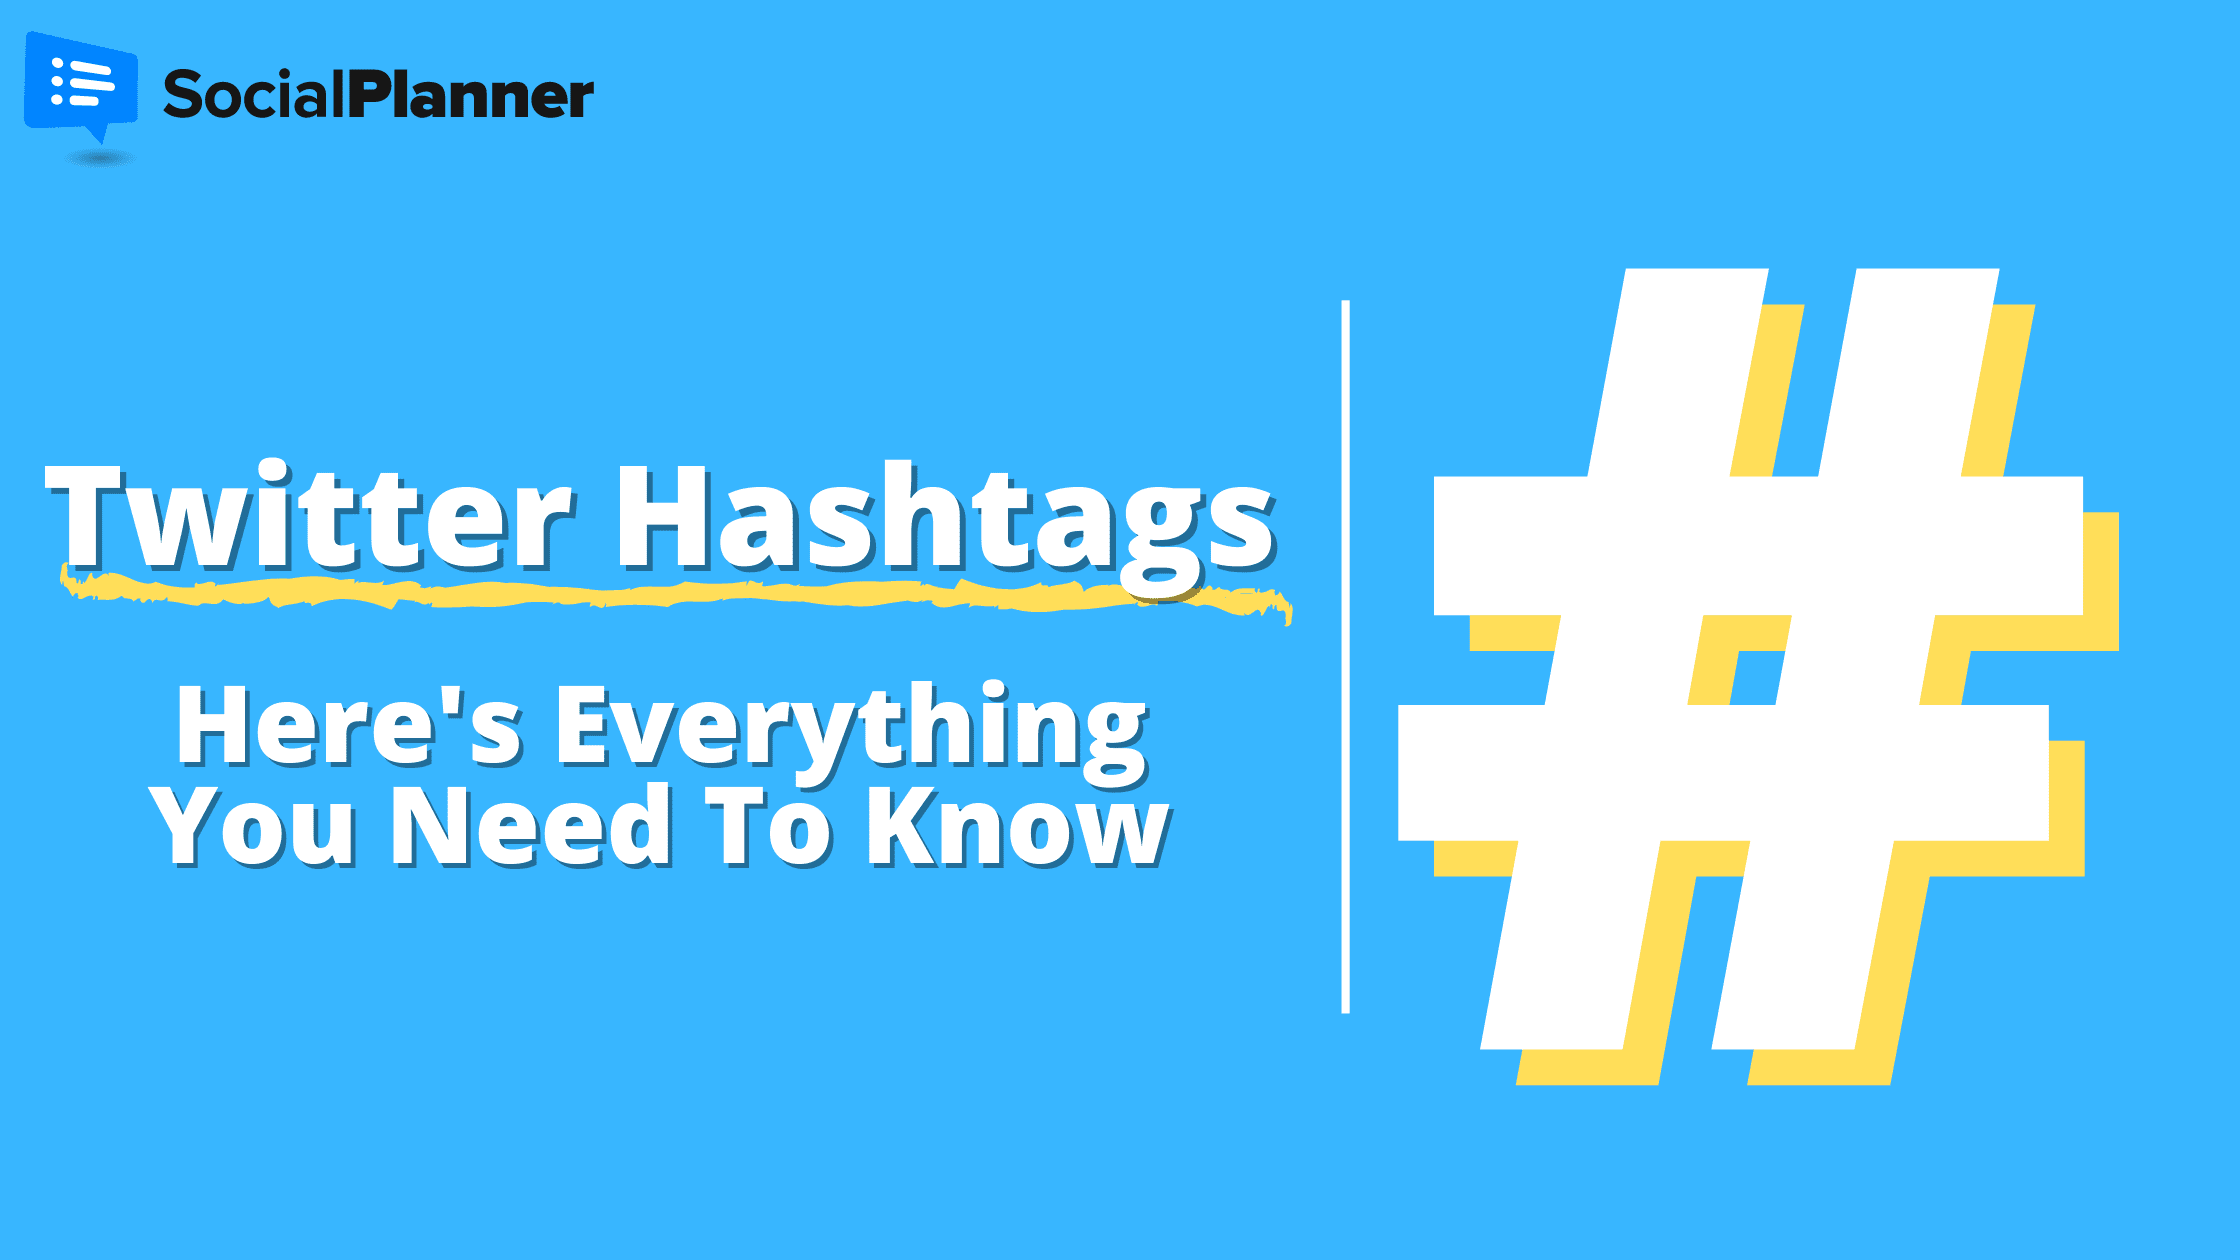 Twitter Hashtags - Here's Everything You Need To Know